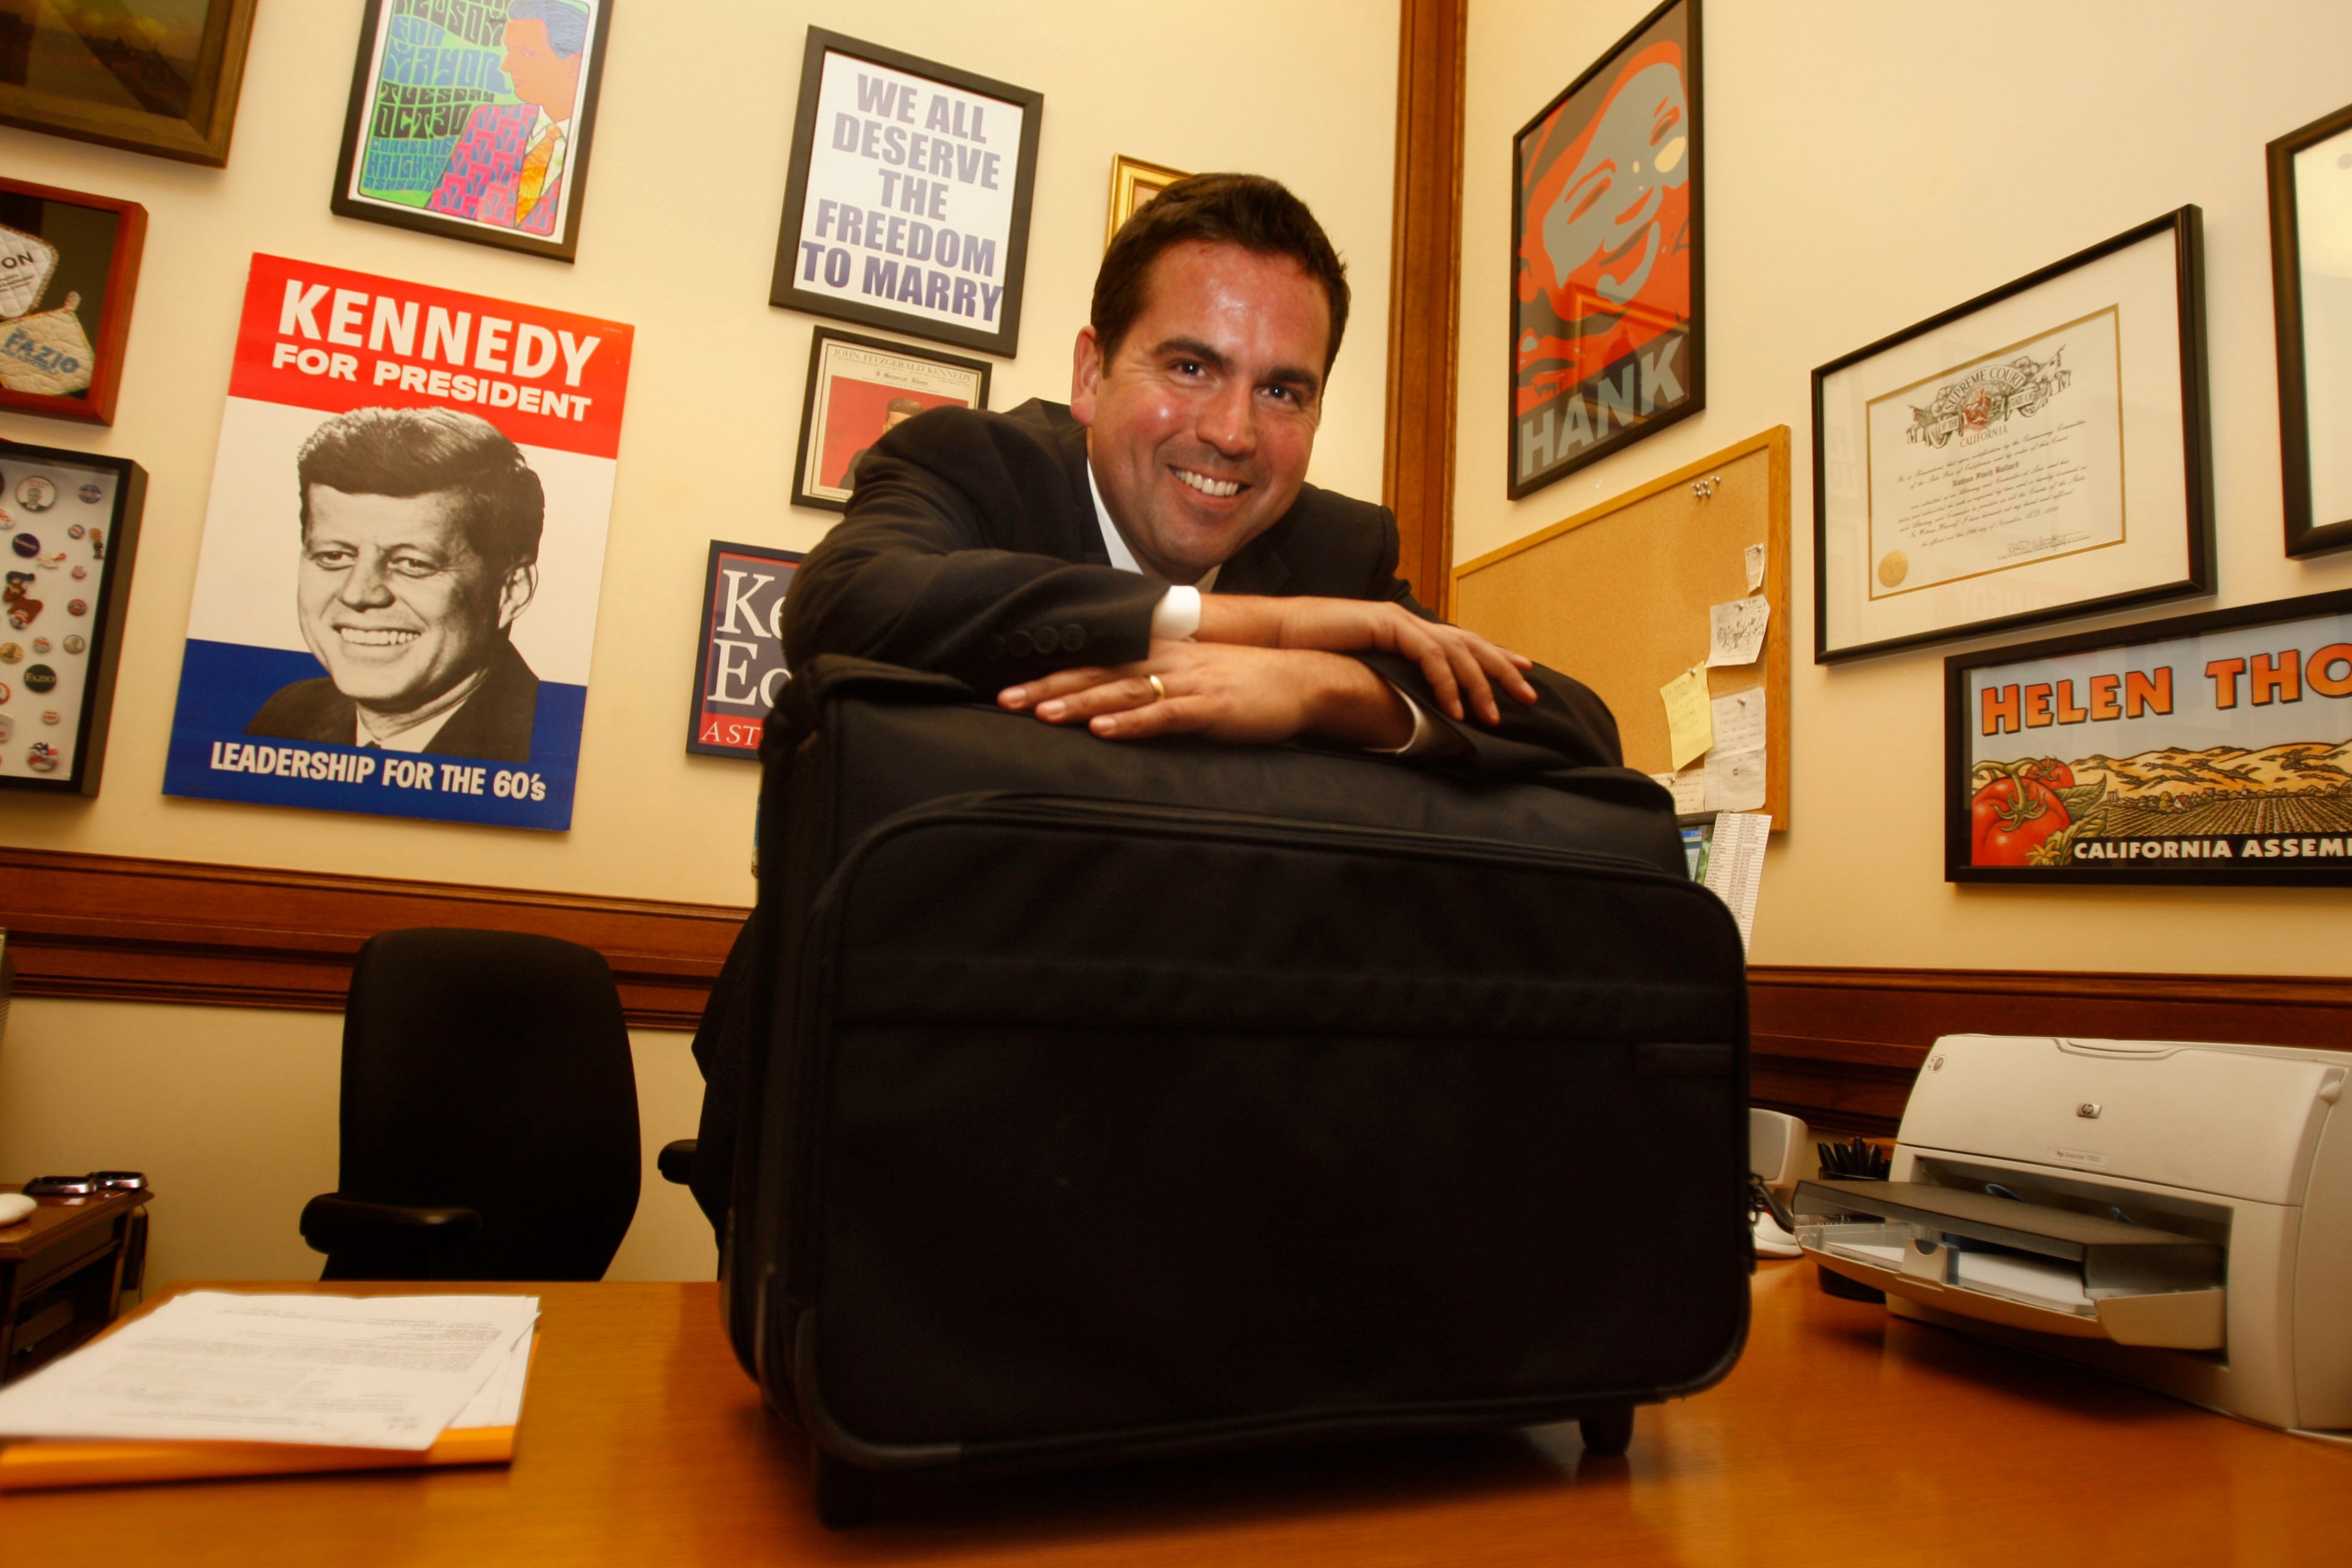 Nathan Ballard smiles as he wears a suit and leans on a briefcase in an office adorned with various political posters and certificates.